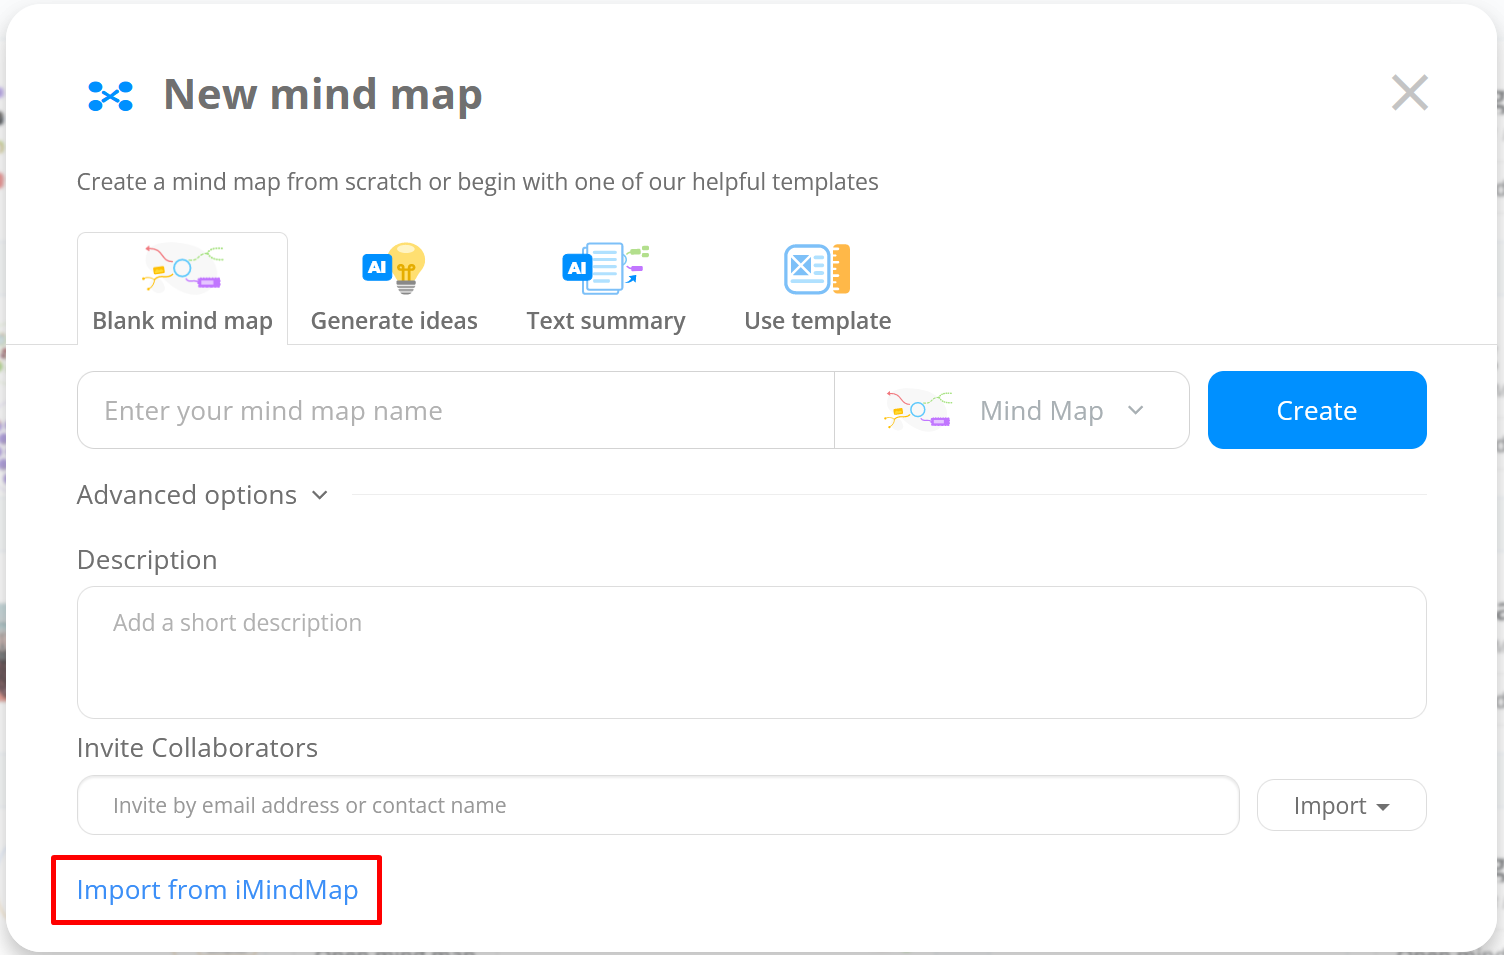 Click Import from iMindMap at the bottom.